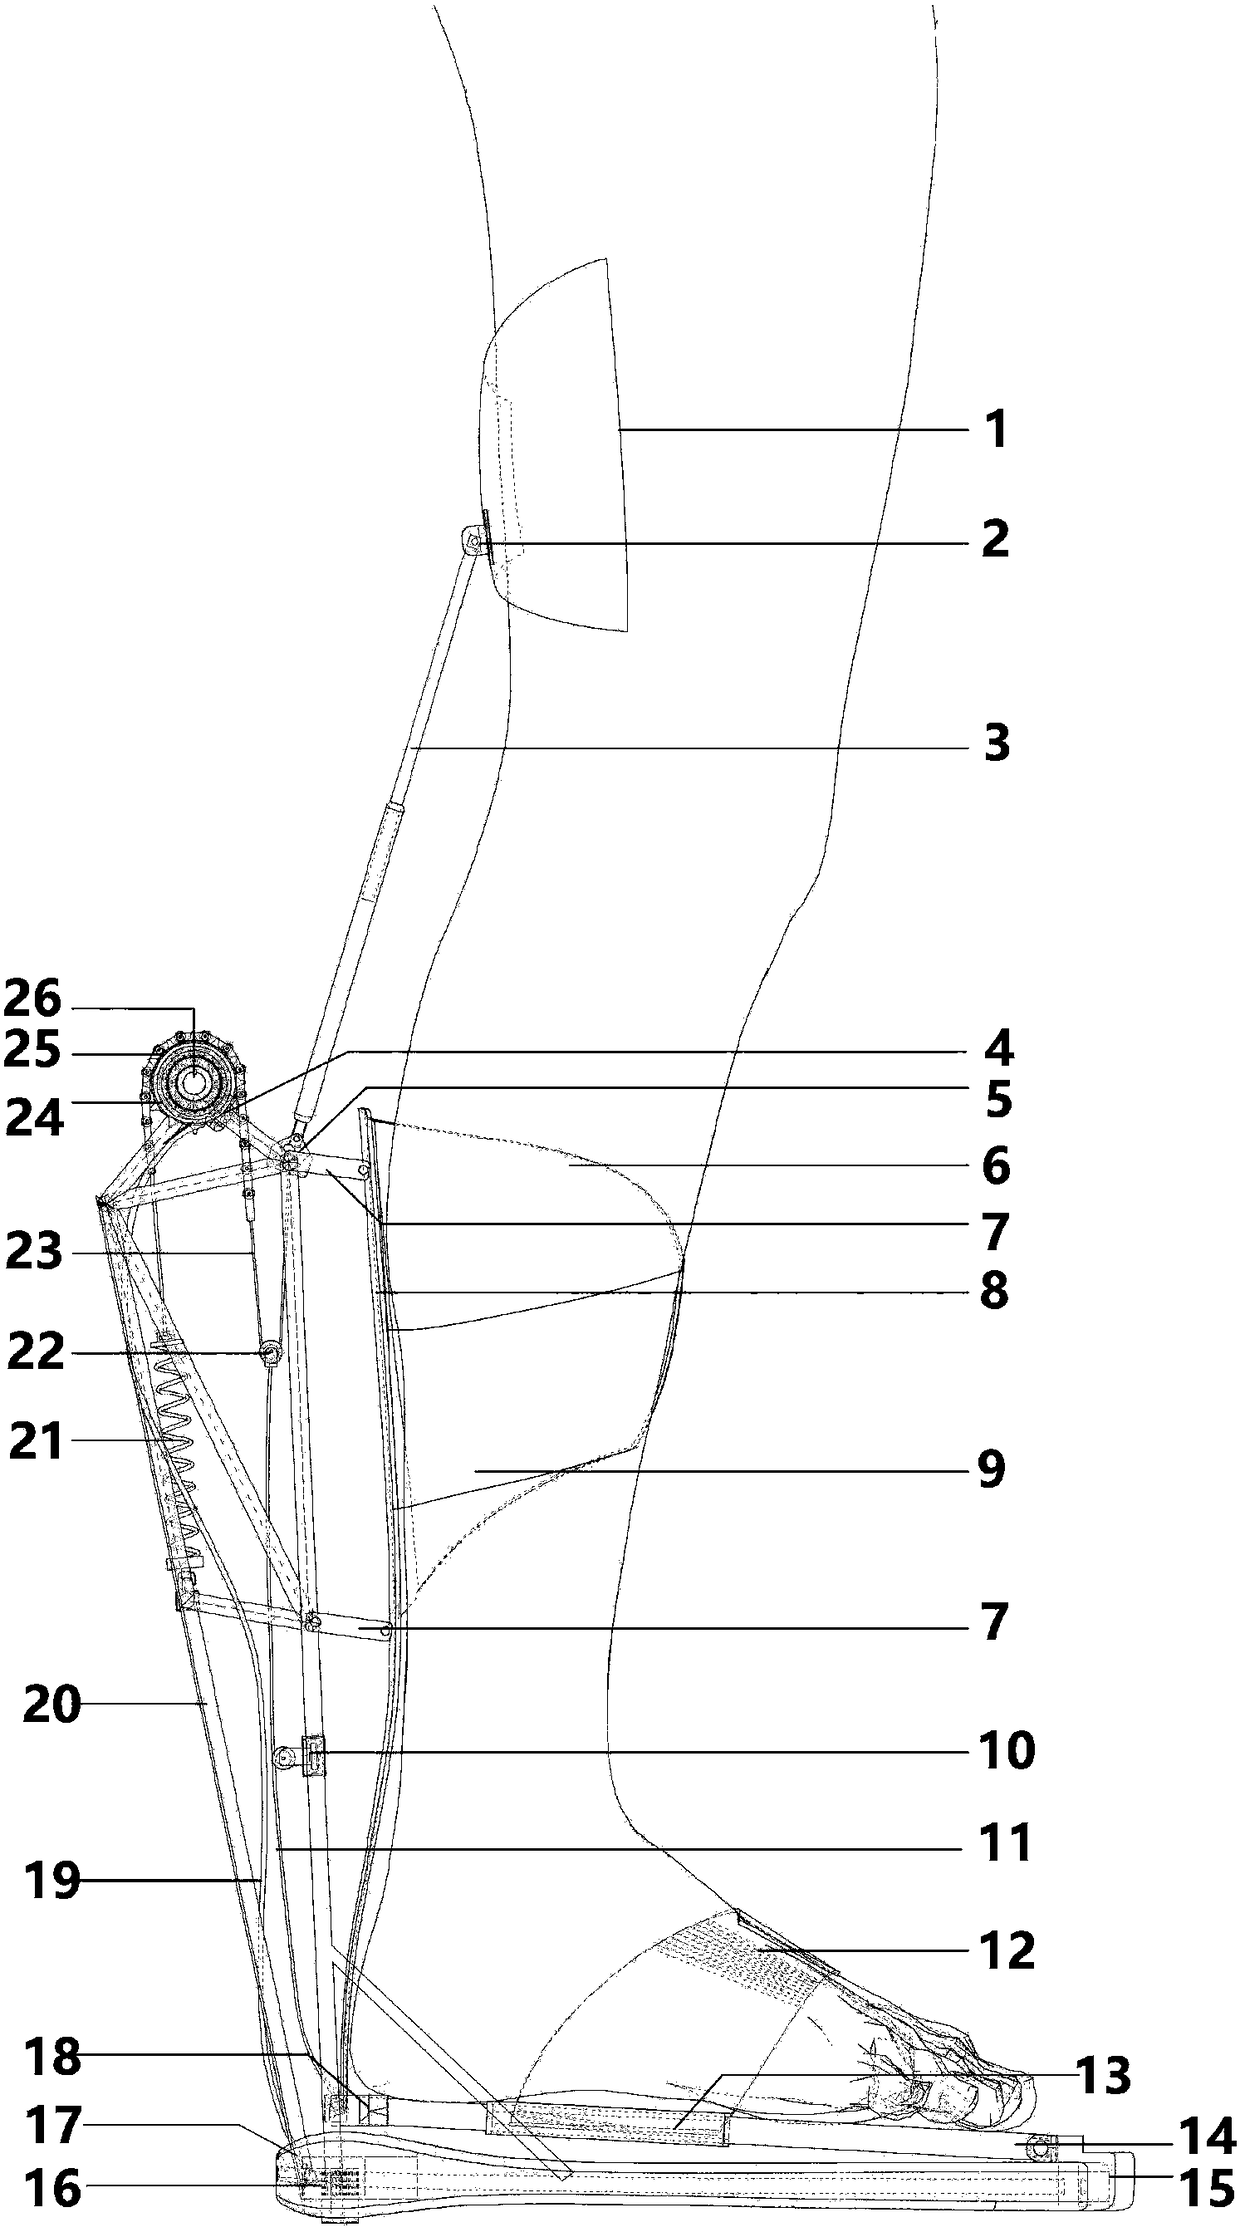 A booster leg based on multi-stage spring lock mechanism